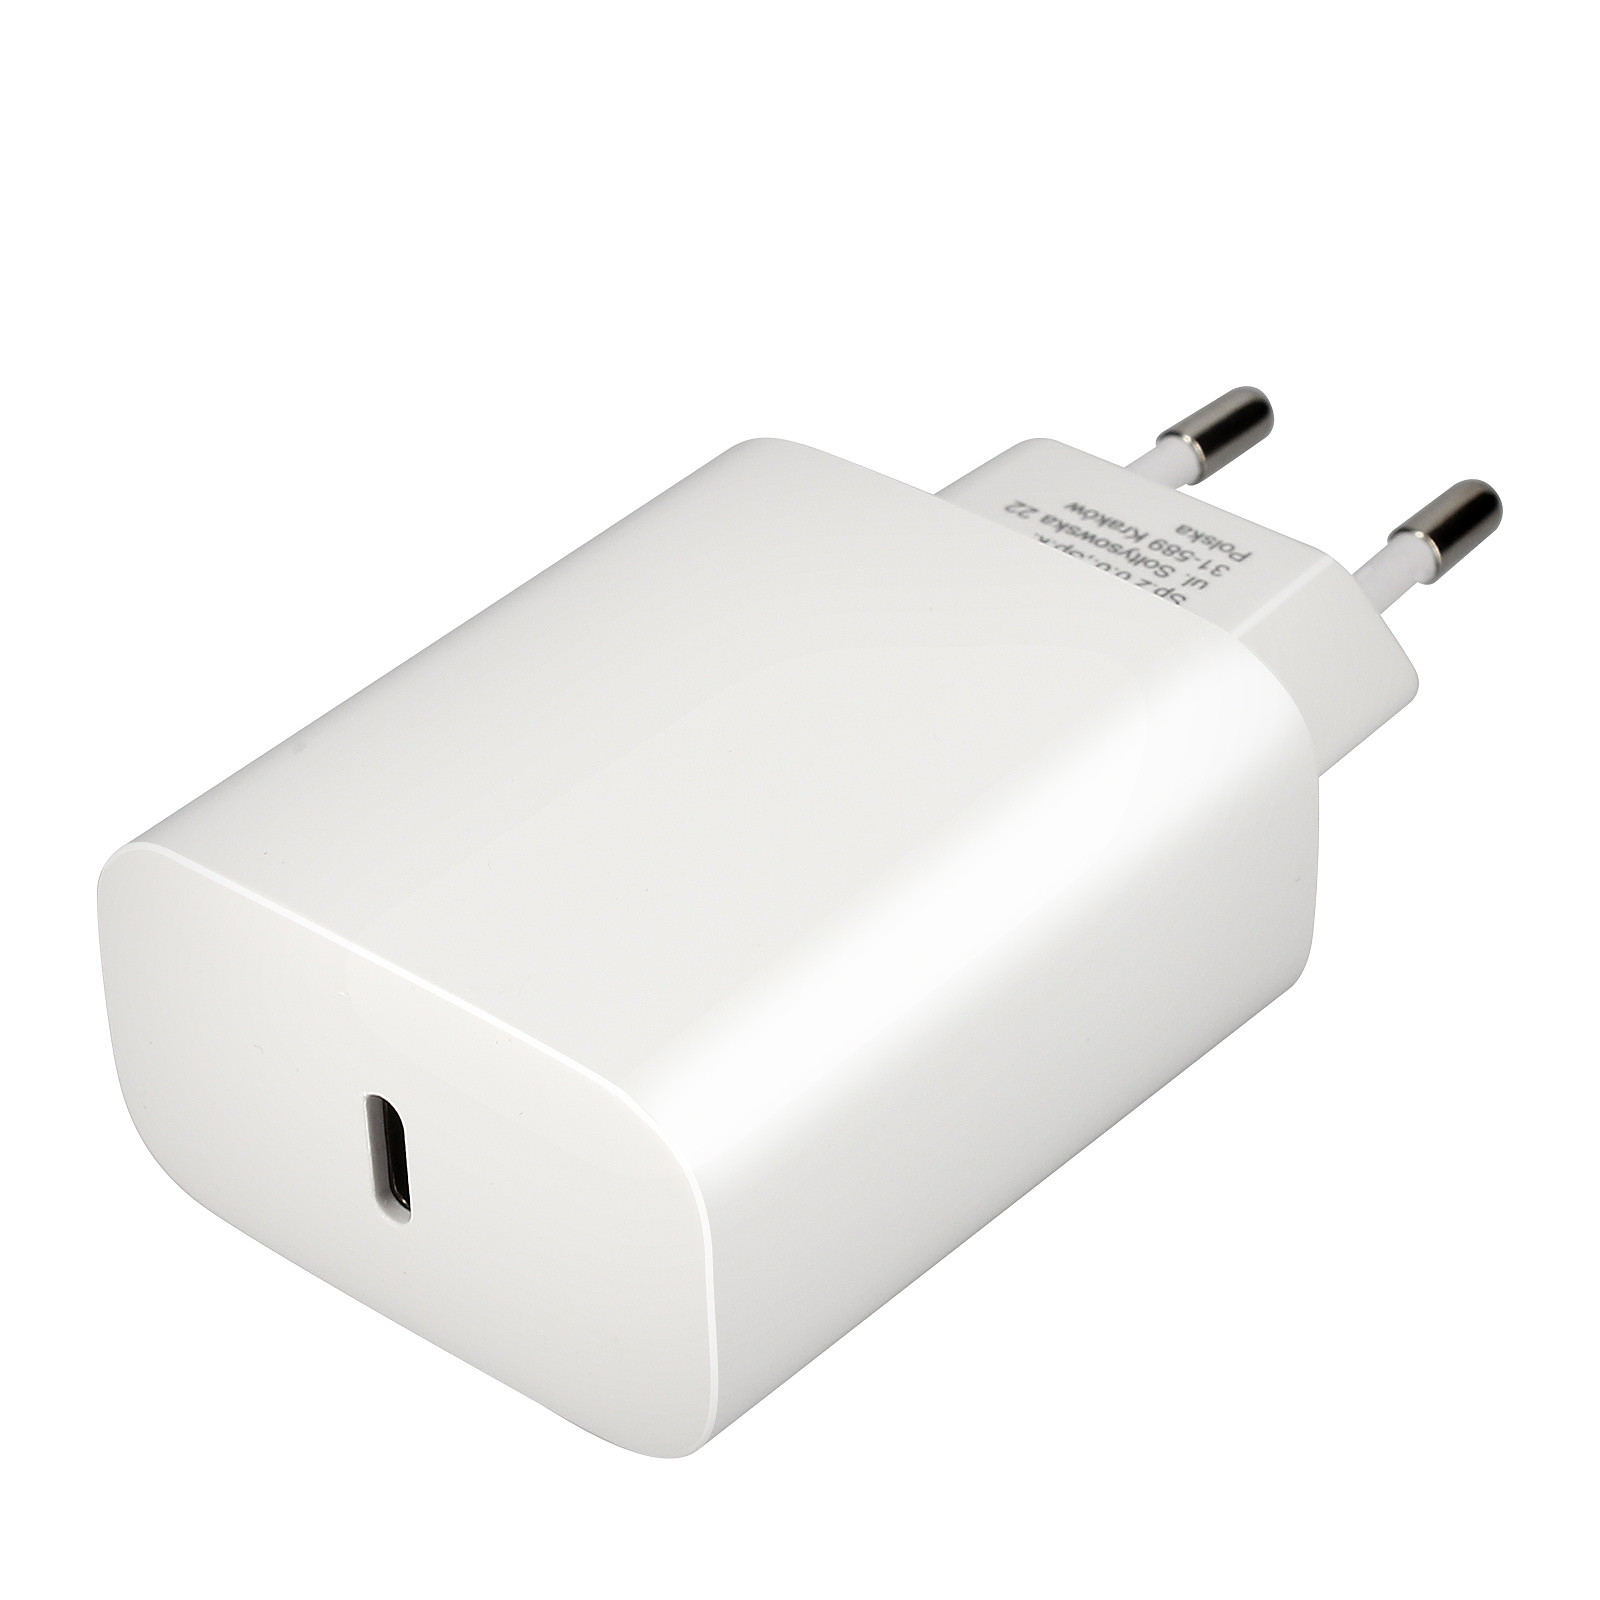 Forcell Chargeur secteur USB-C Power Delivery 25W Quick Charge 4.0 Fonction AFC - Chargeur telephone Forcell